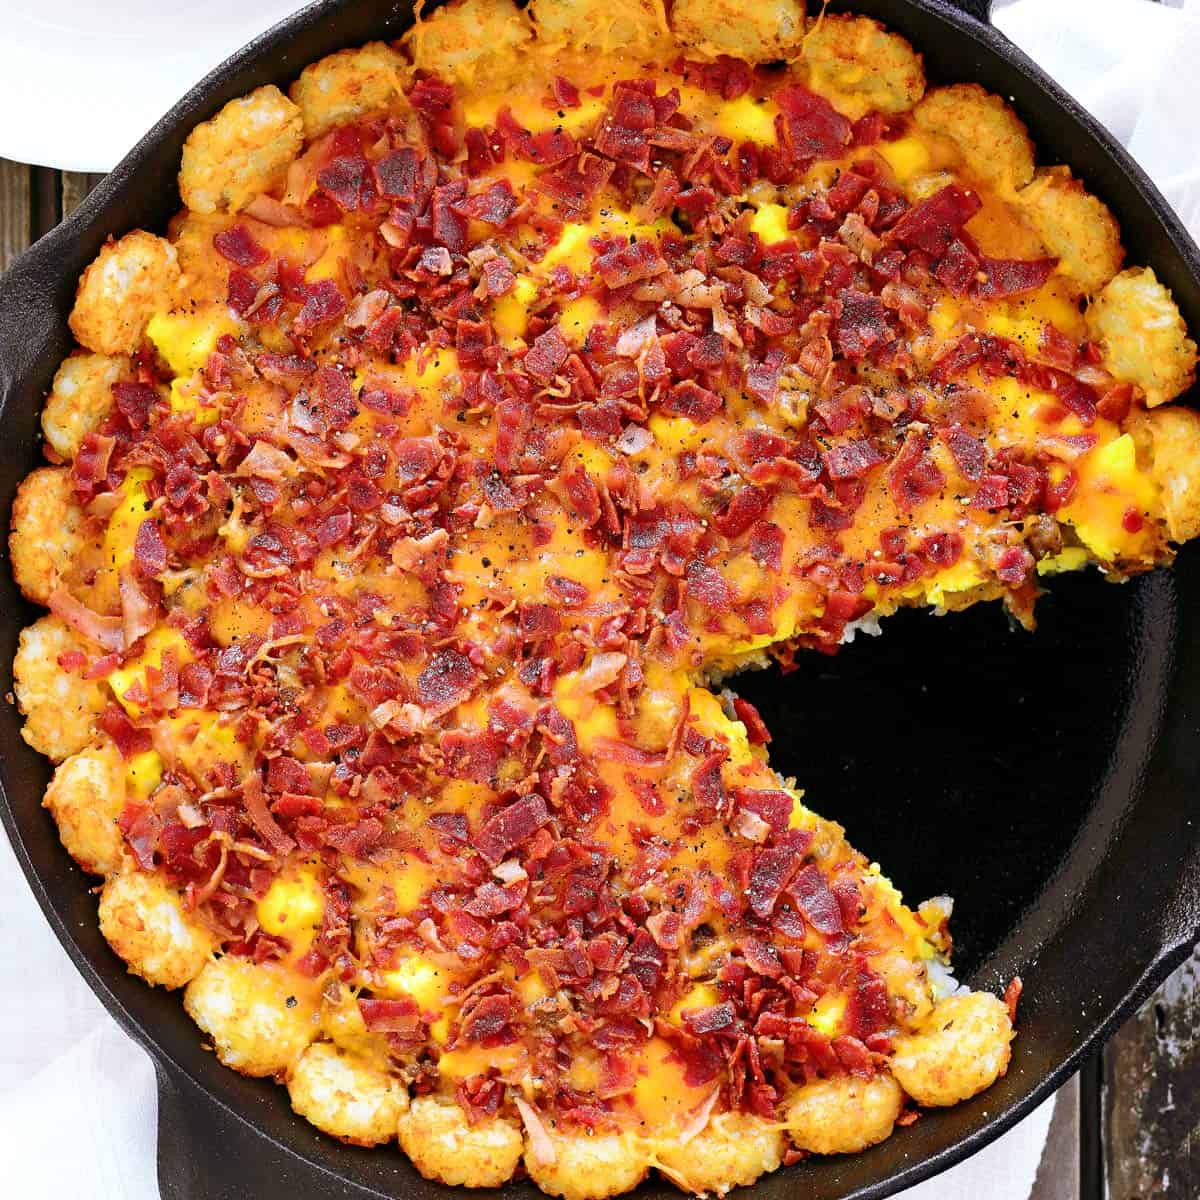 Tater tot breakfast casserole with a slice removed.